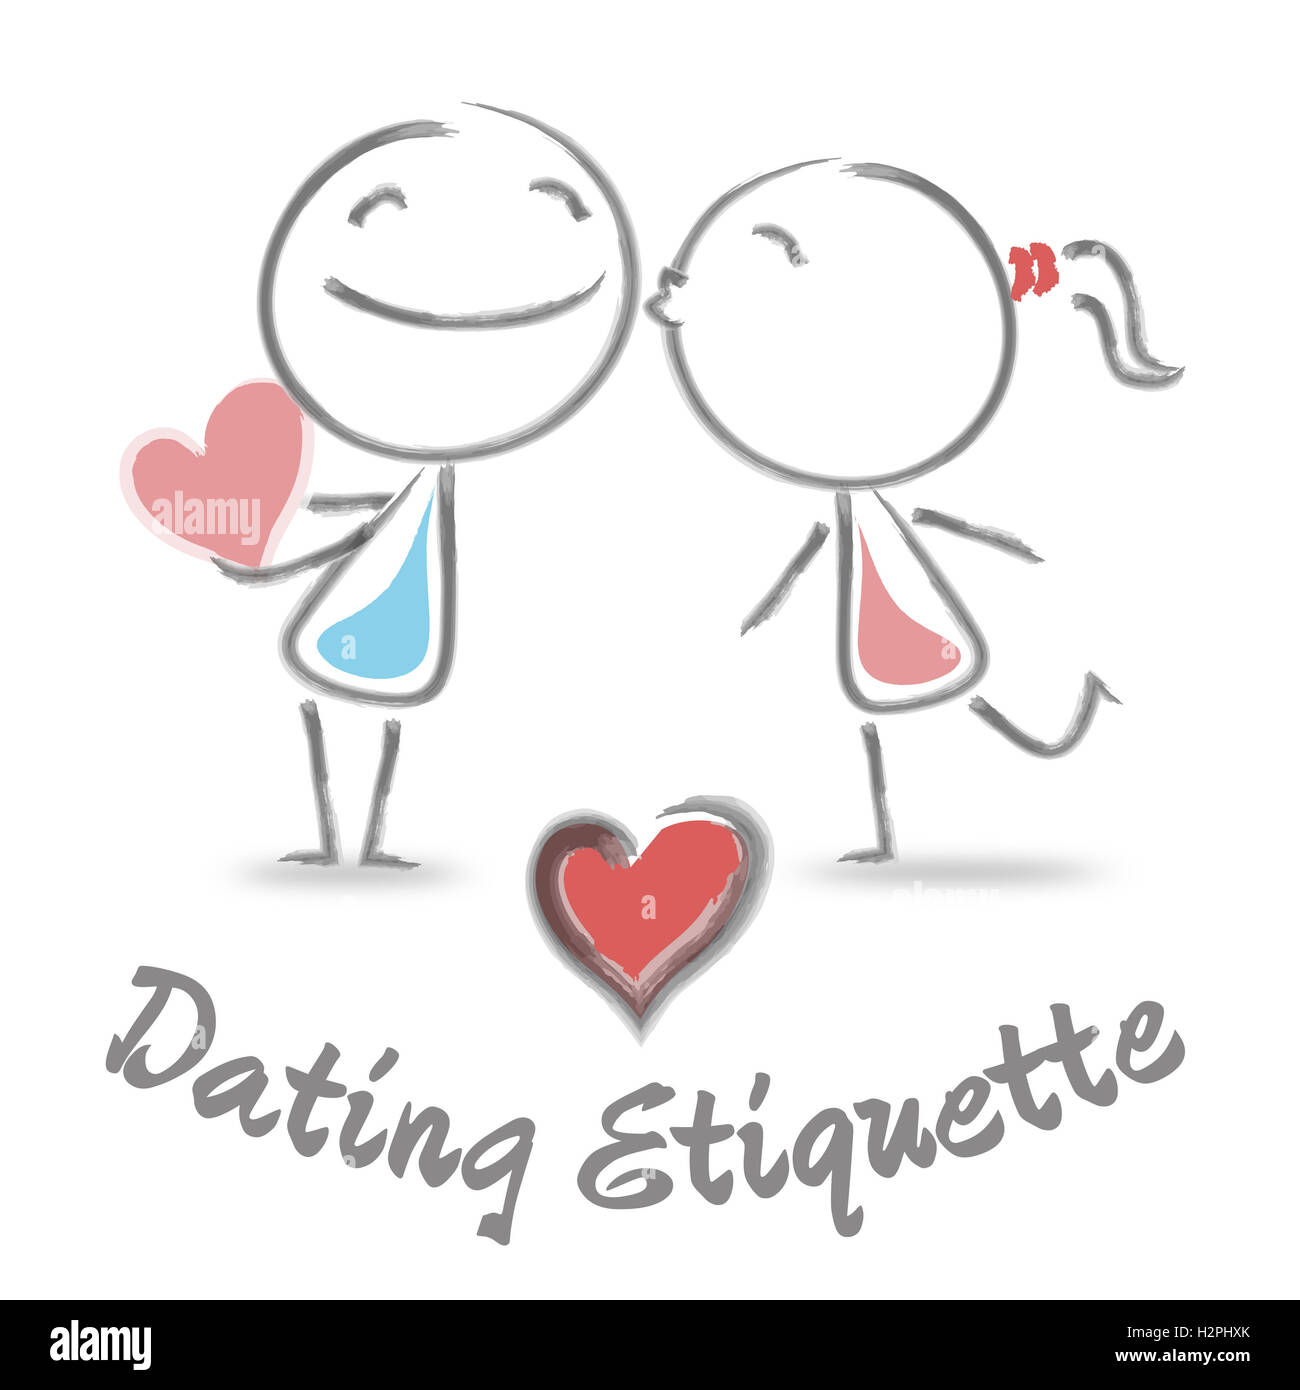 Dating Etiquette Indicating Date Chivalry And Respect Stock Photo